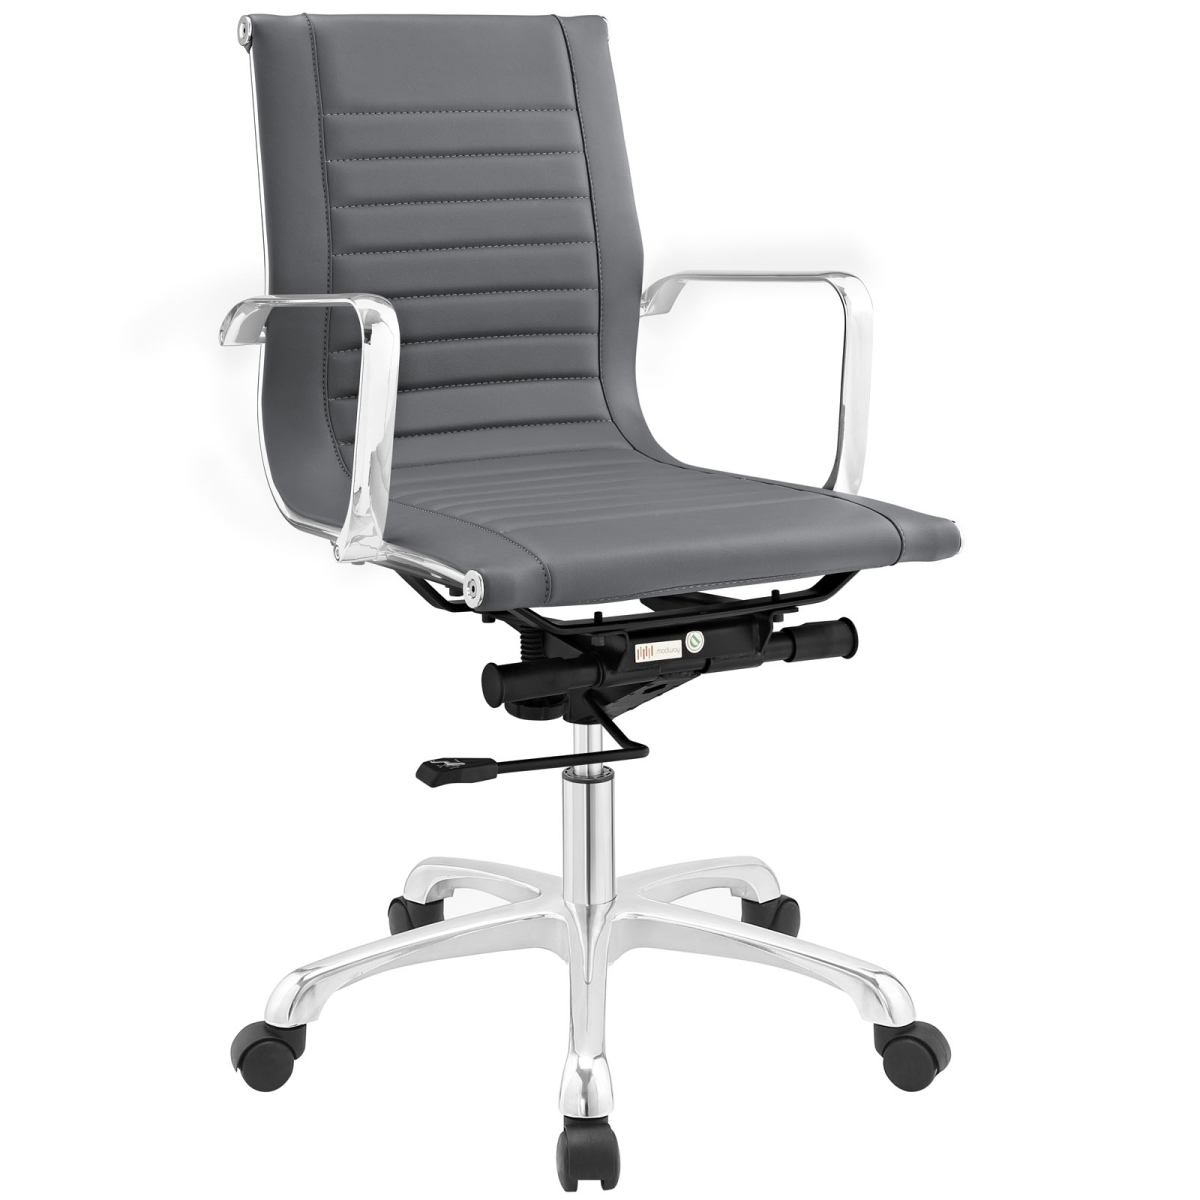 Modway Eei-1527-gry Runway Mid Back Fabric Office Chair, Gray